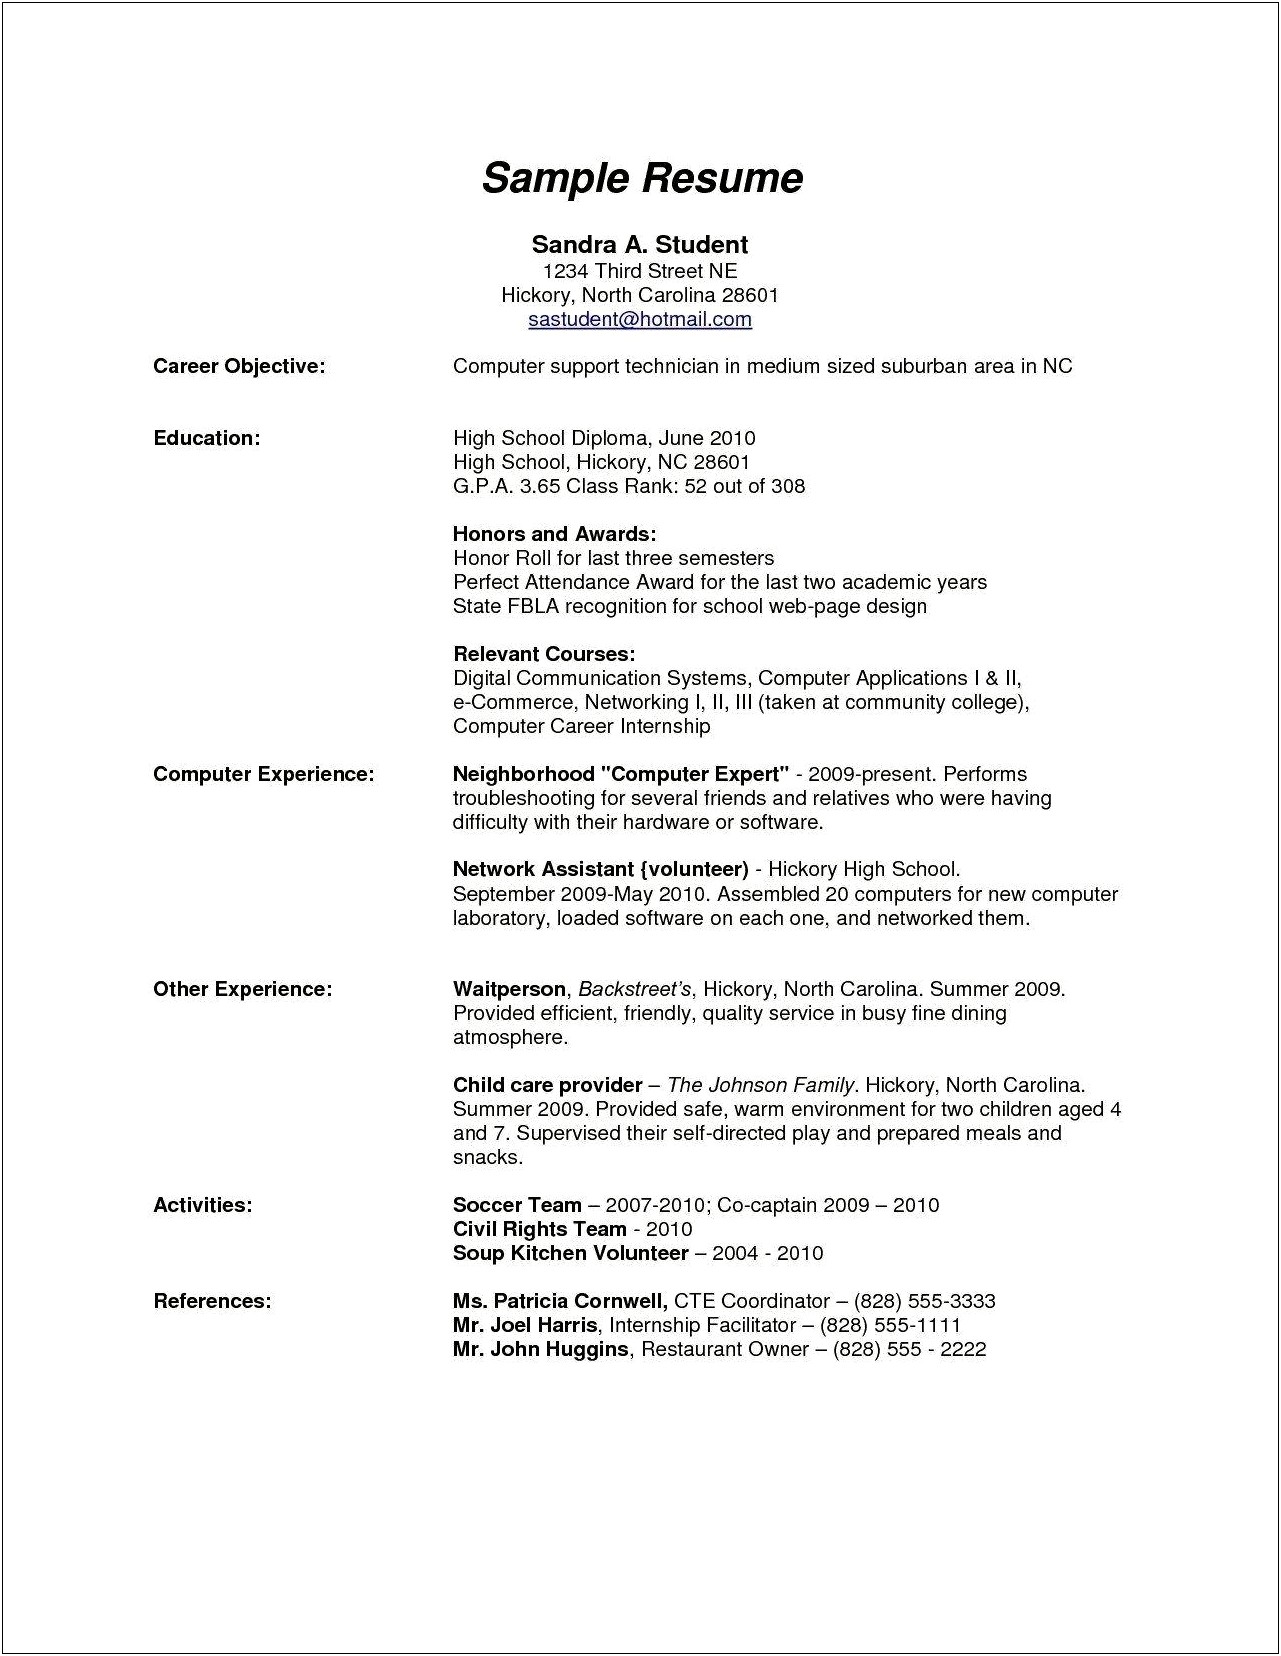 Graduate School Of Education Objective Statement For Resumes